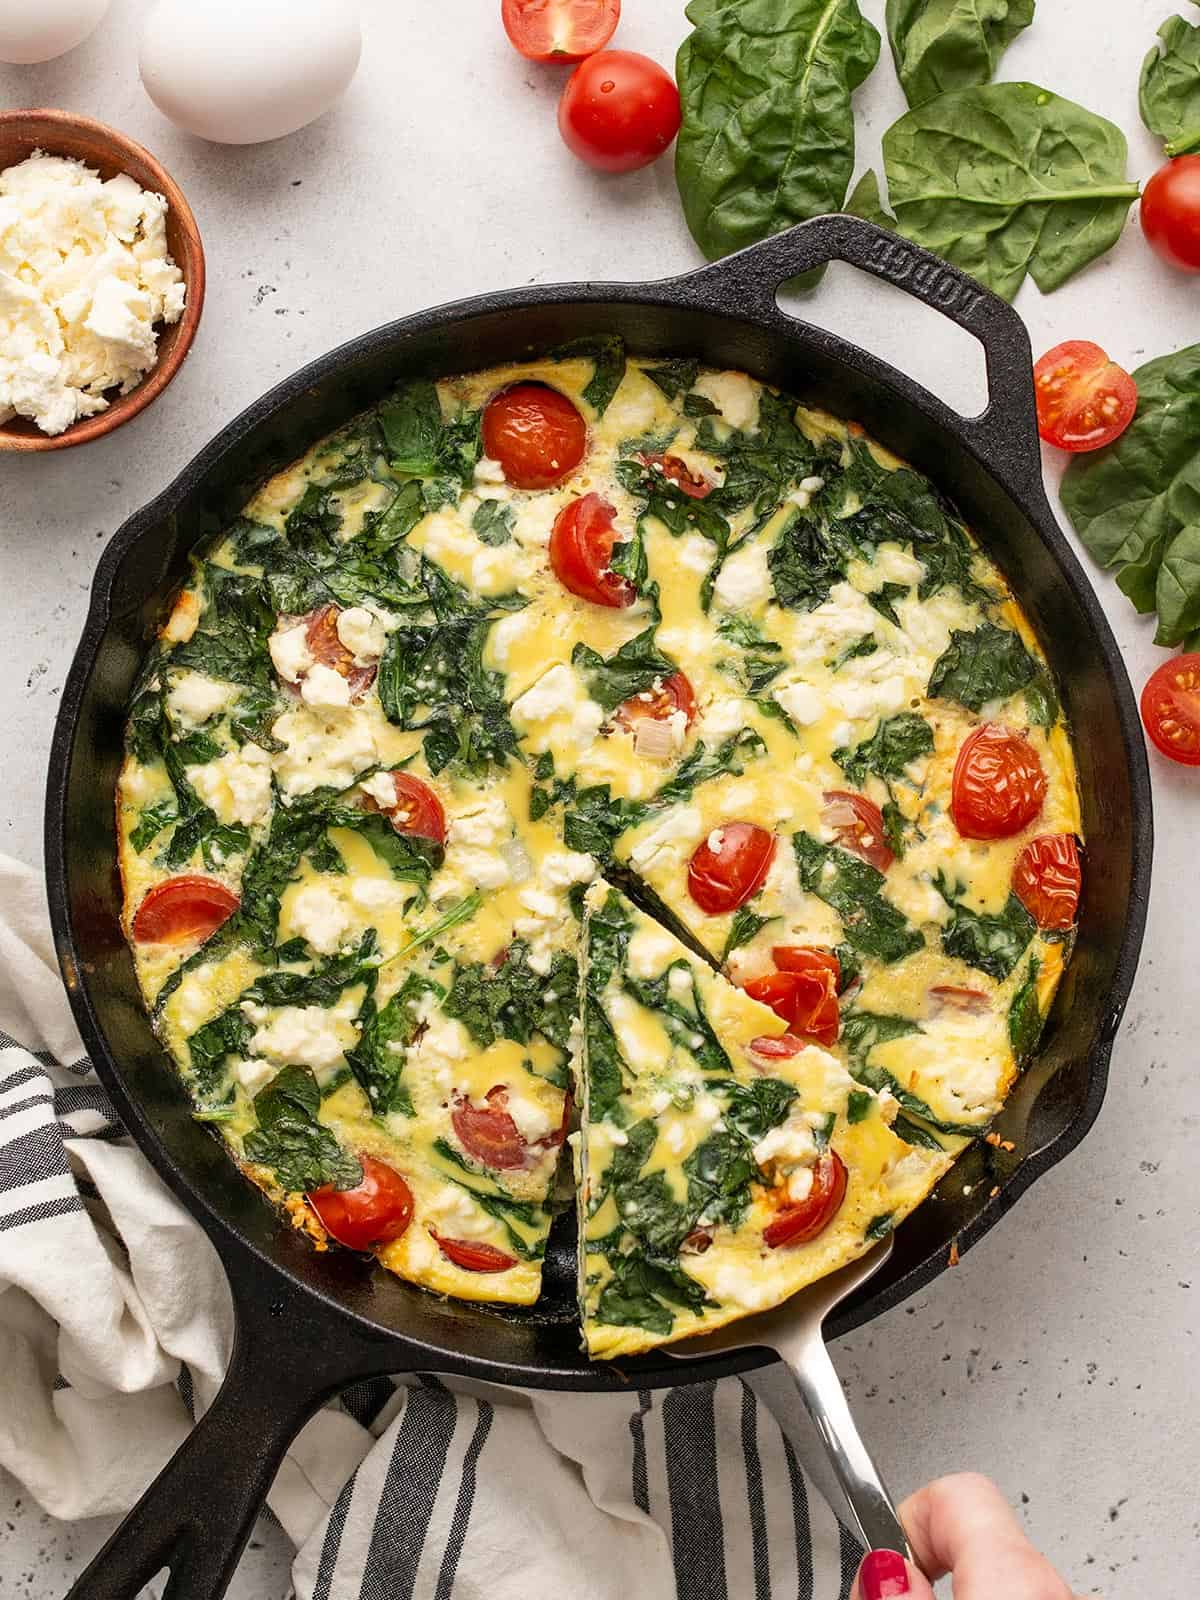 A slice of frittata being lifted out of a cast iron skillet.